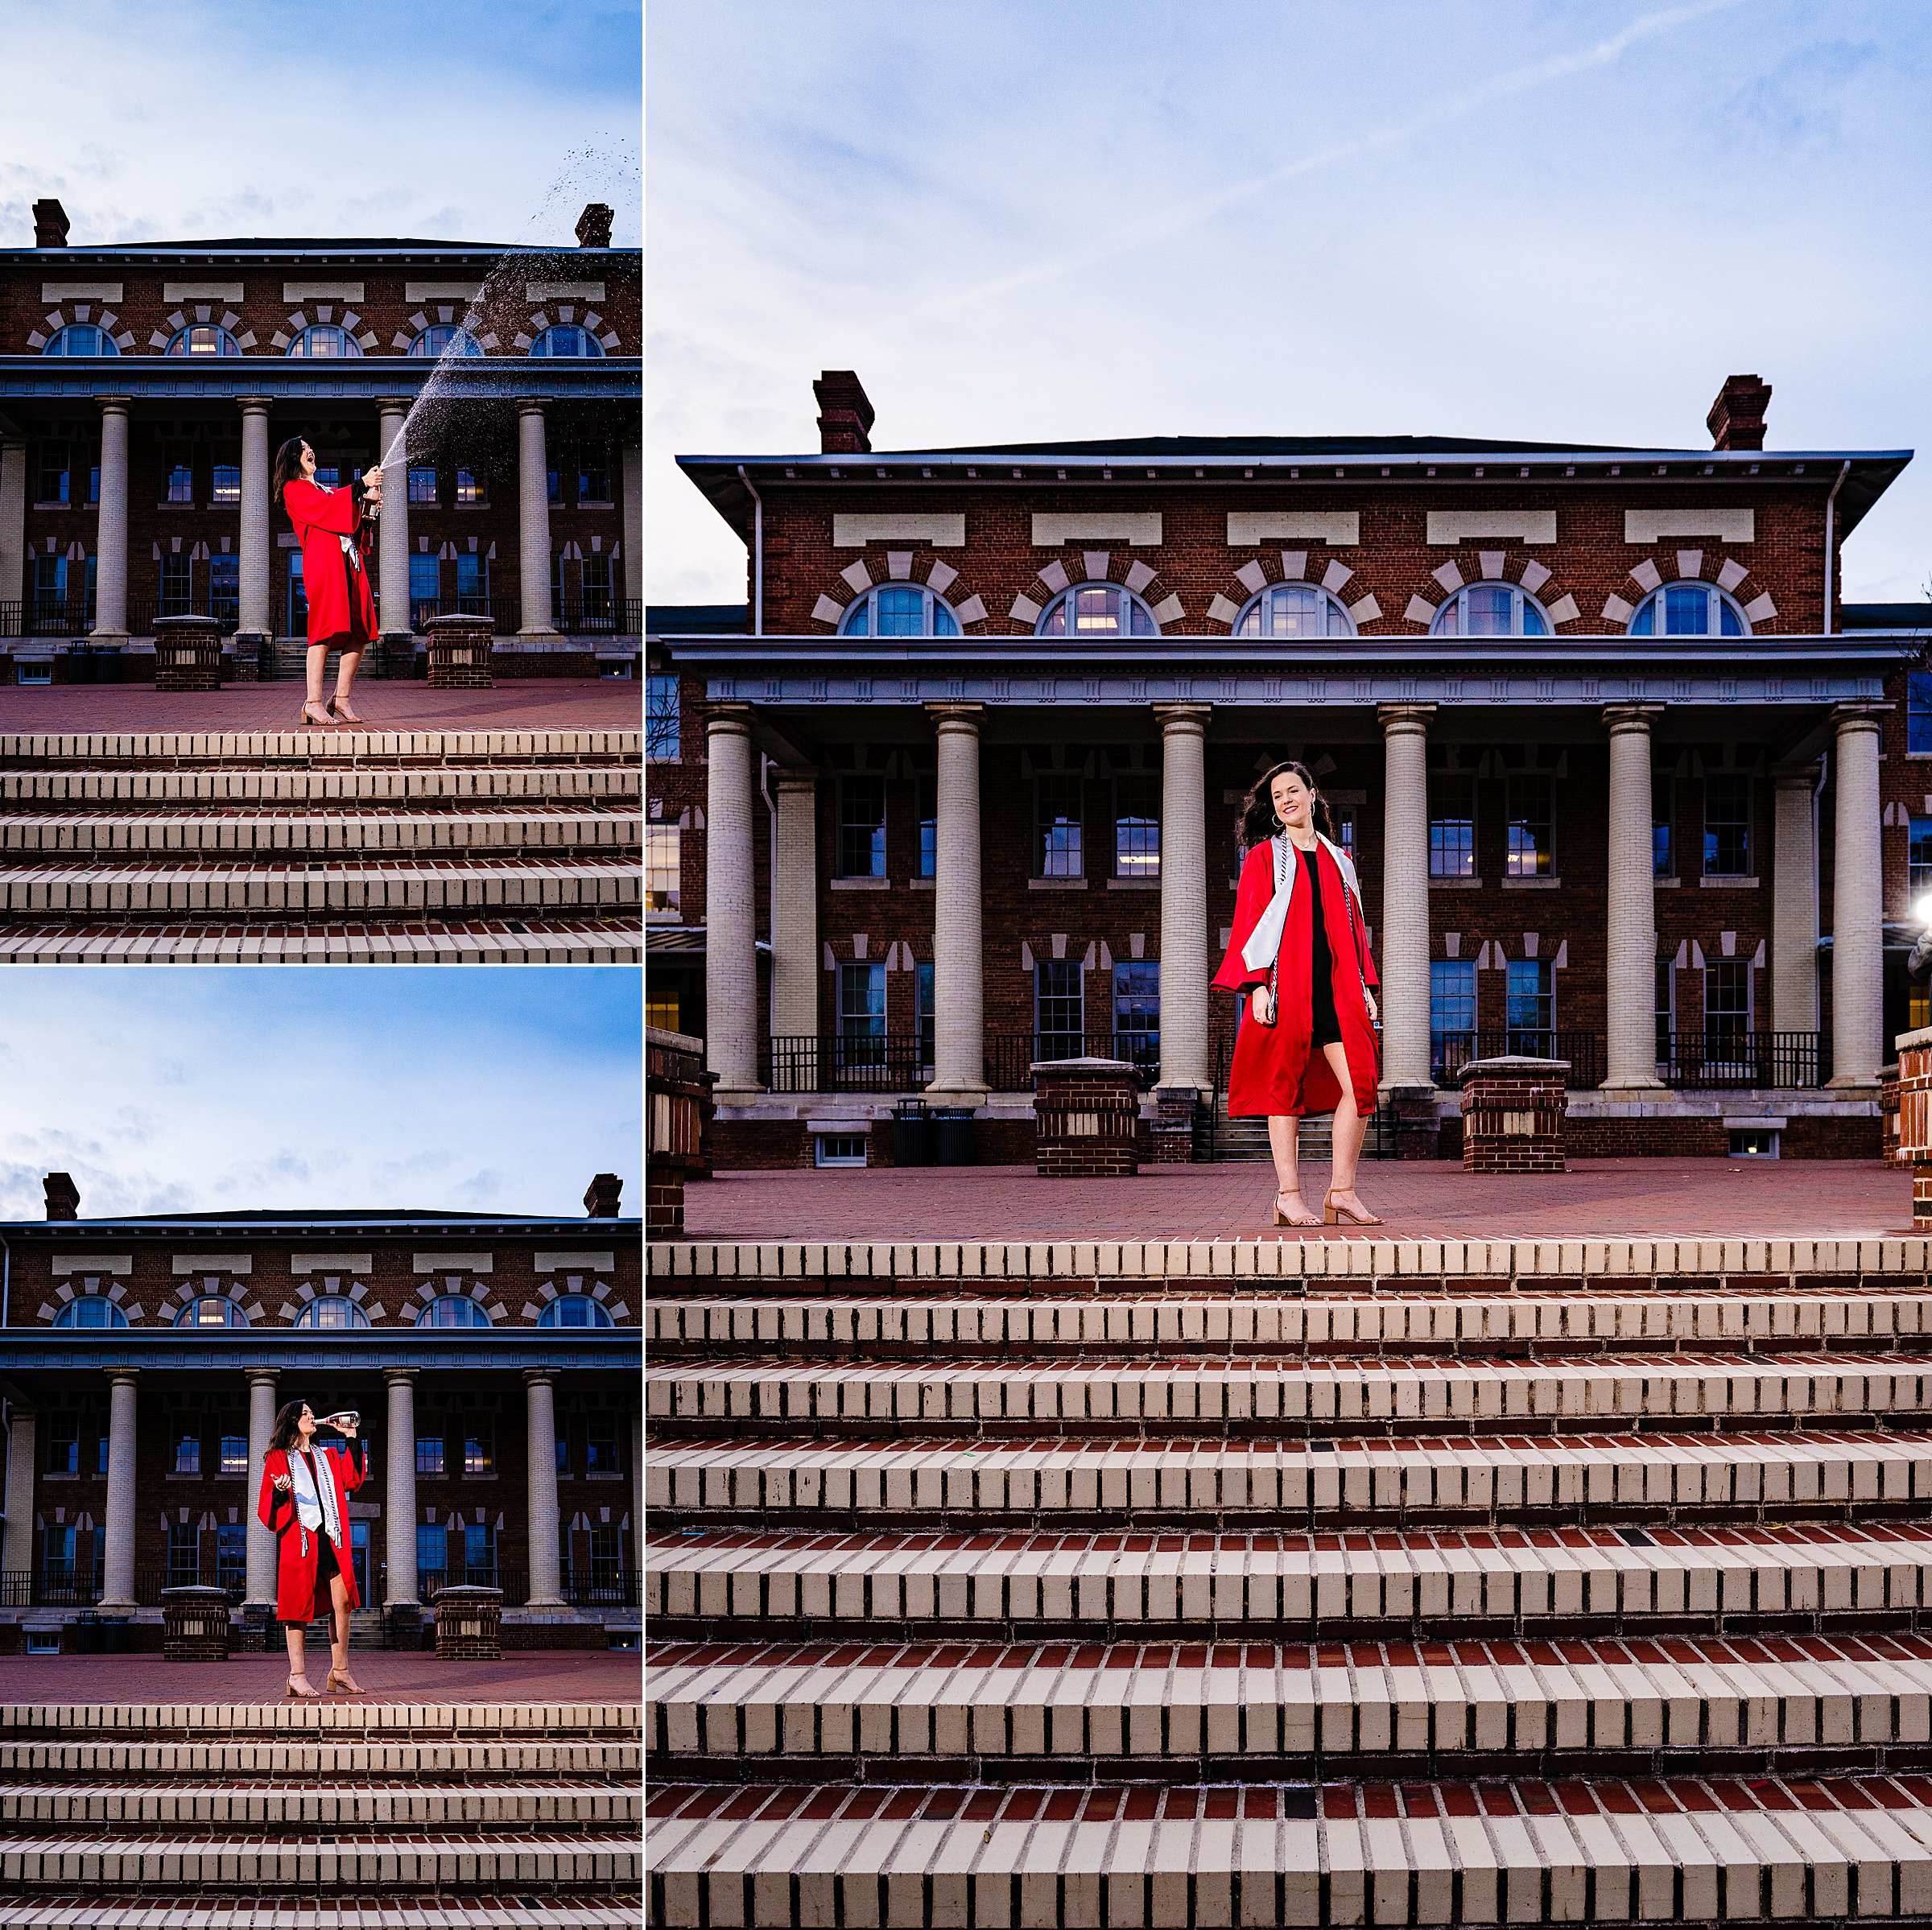 An NC State grad, class of 2019, pops champagne to celebrate during graduation portraits. She's wearing her red robe and standing at the top of the steps in front of the 1911 Building bordering the Court of Carolinas | kivusandcamera.com